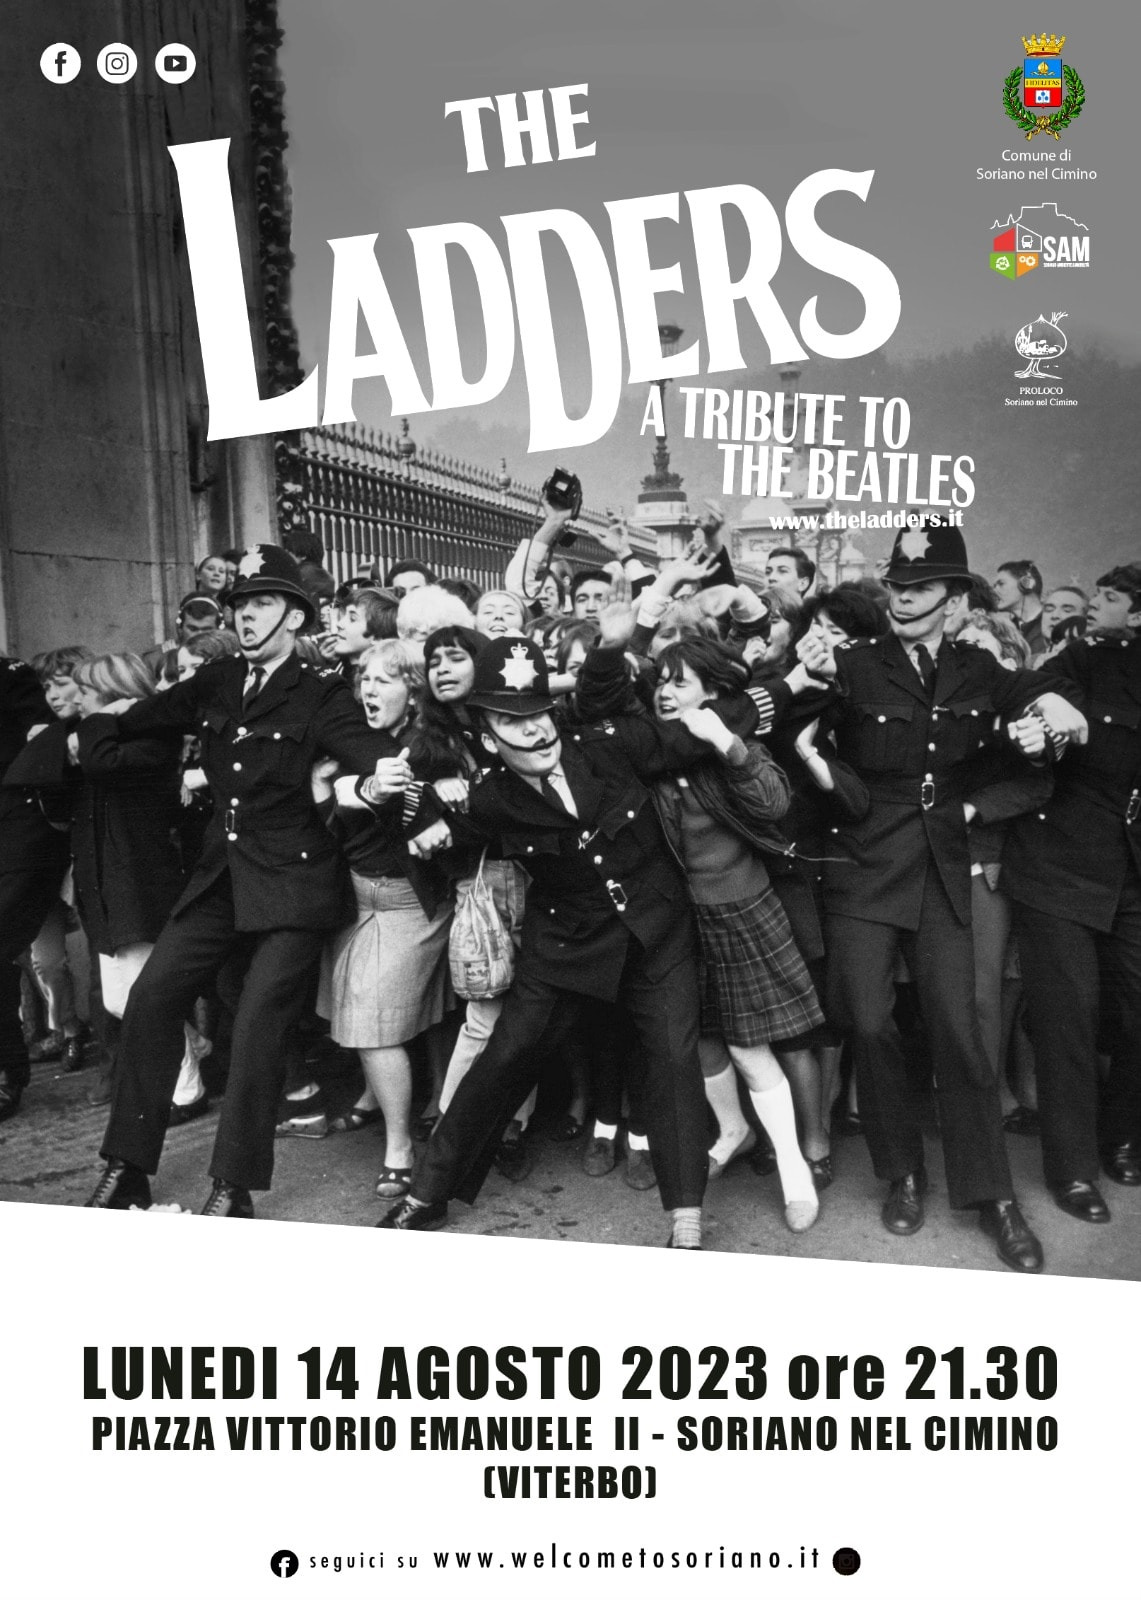 THE LADDERS TRIBUTO BEATLES